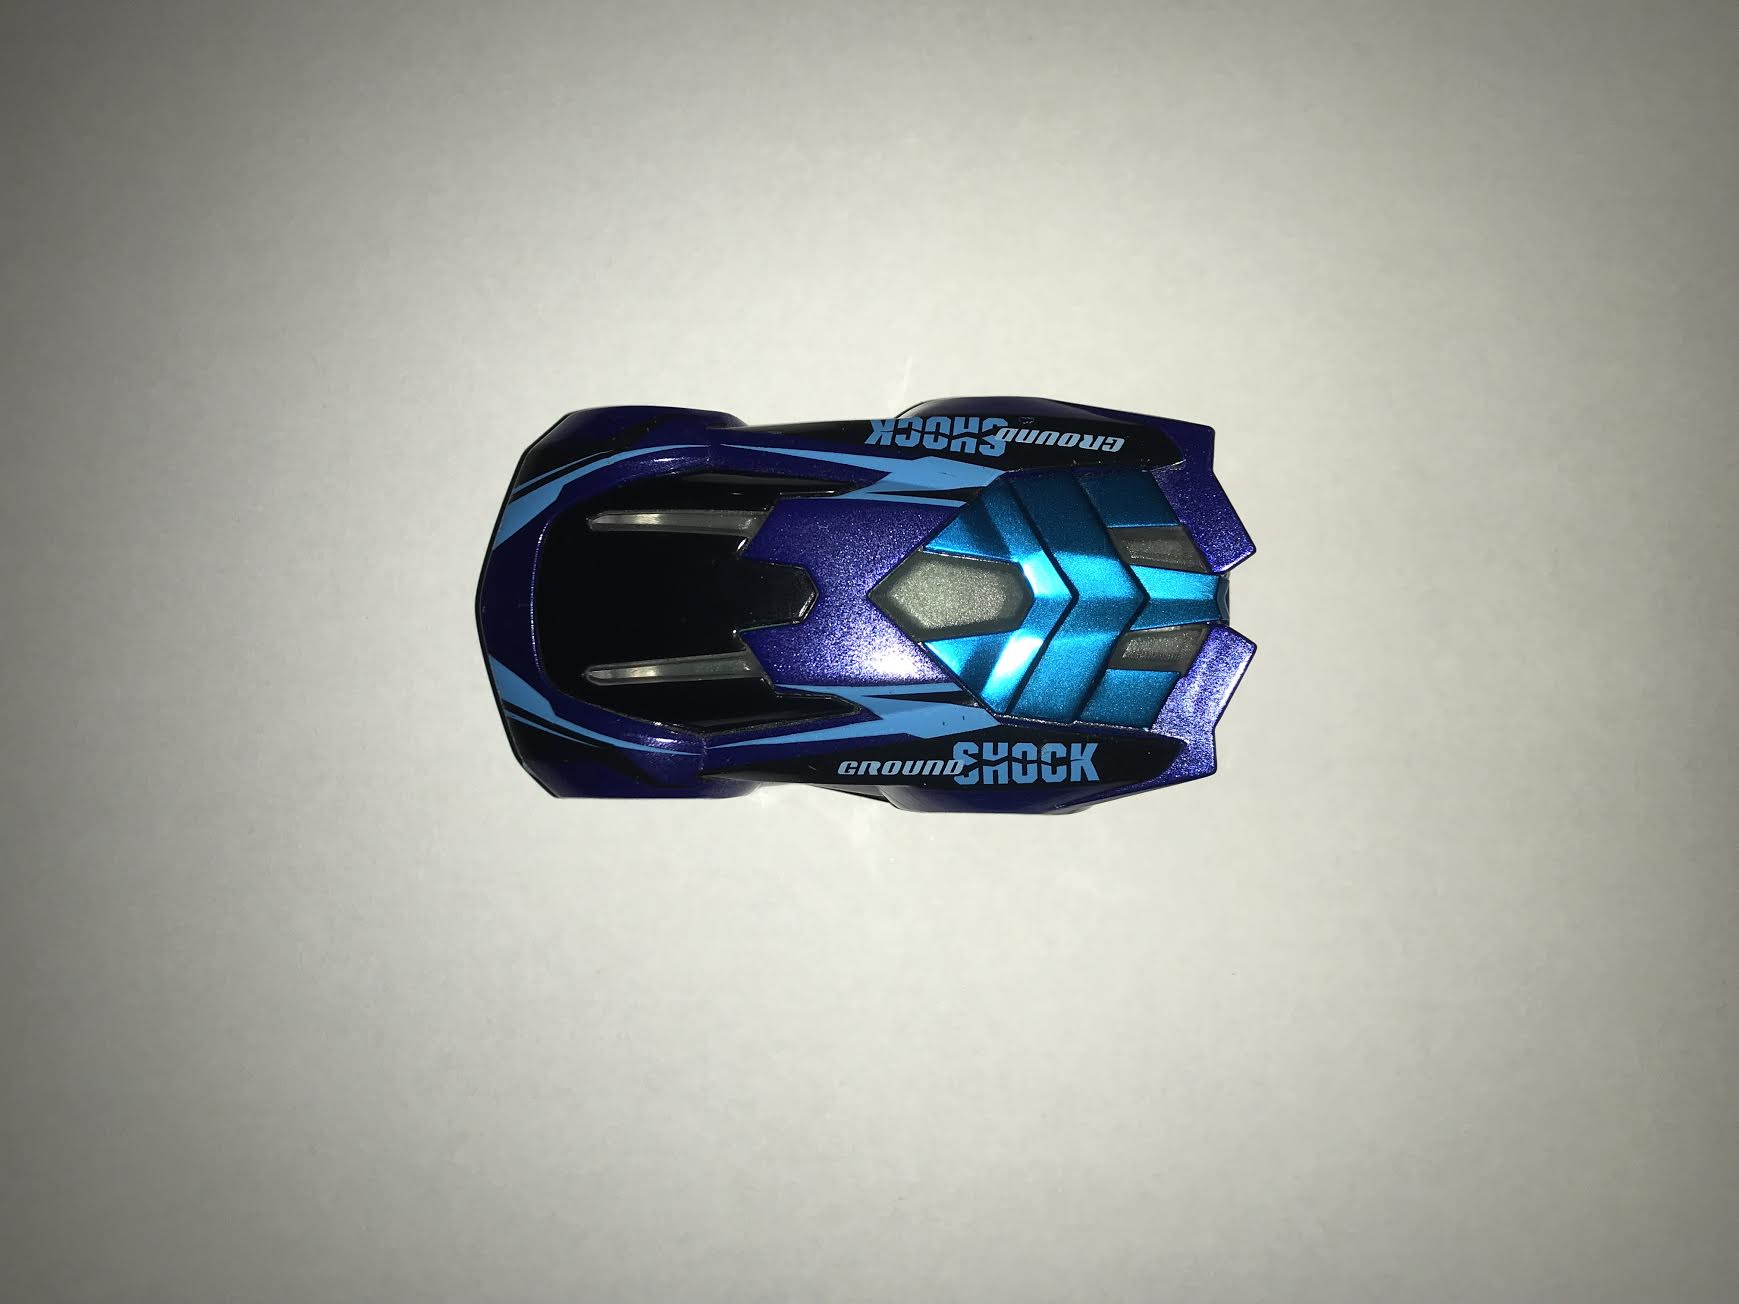 anki overdrive car charger